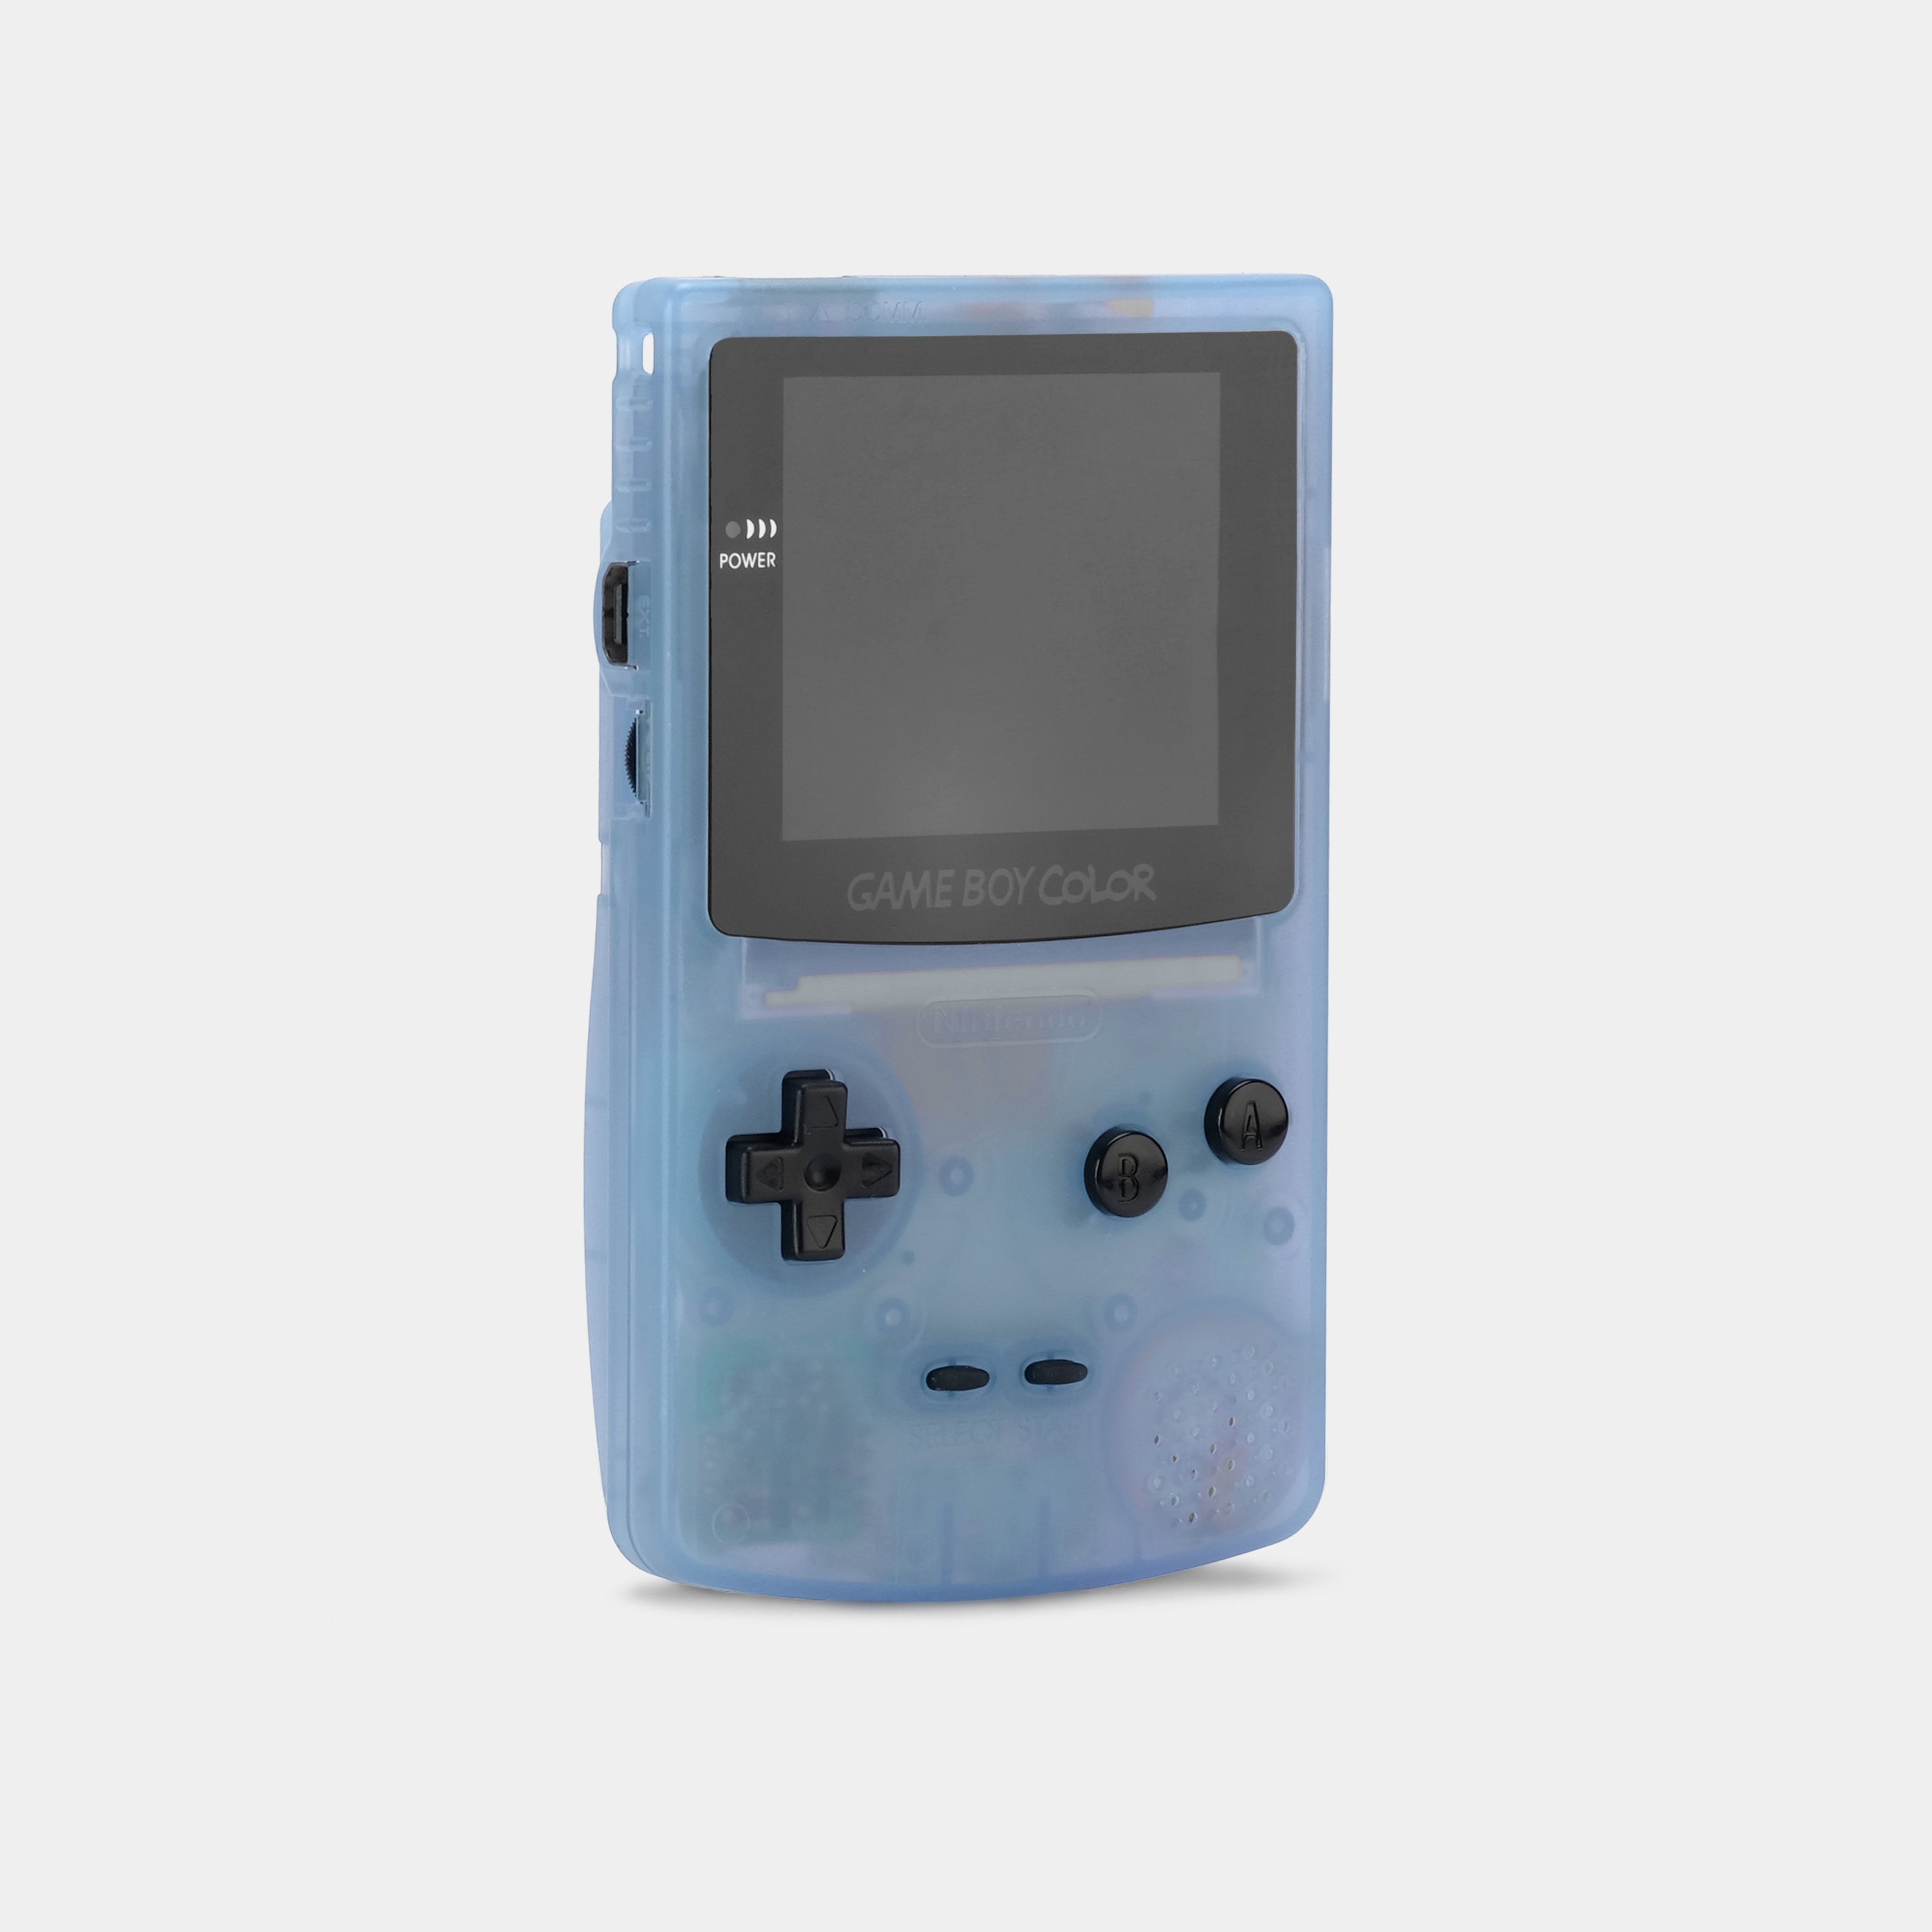 Nintendo Game Boy Color Translucent Light Blue Glow In The Dark Game Console With Backlit Screen